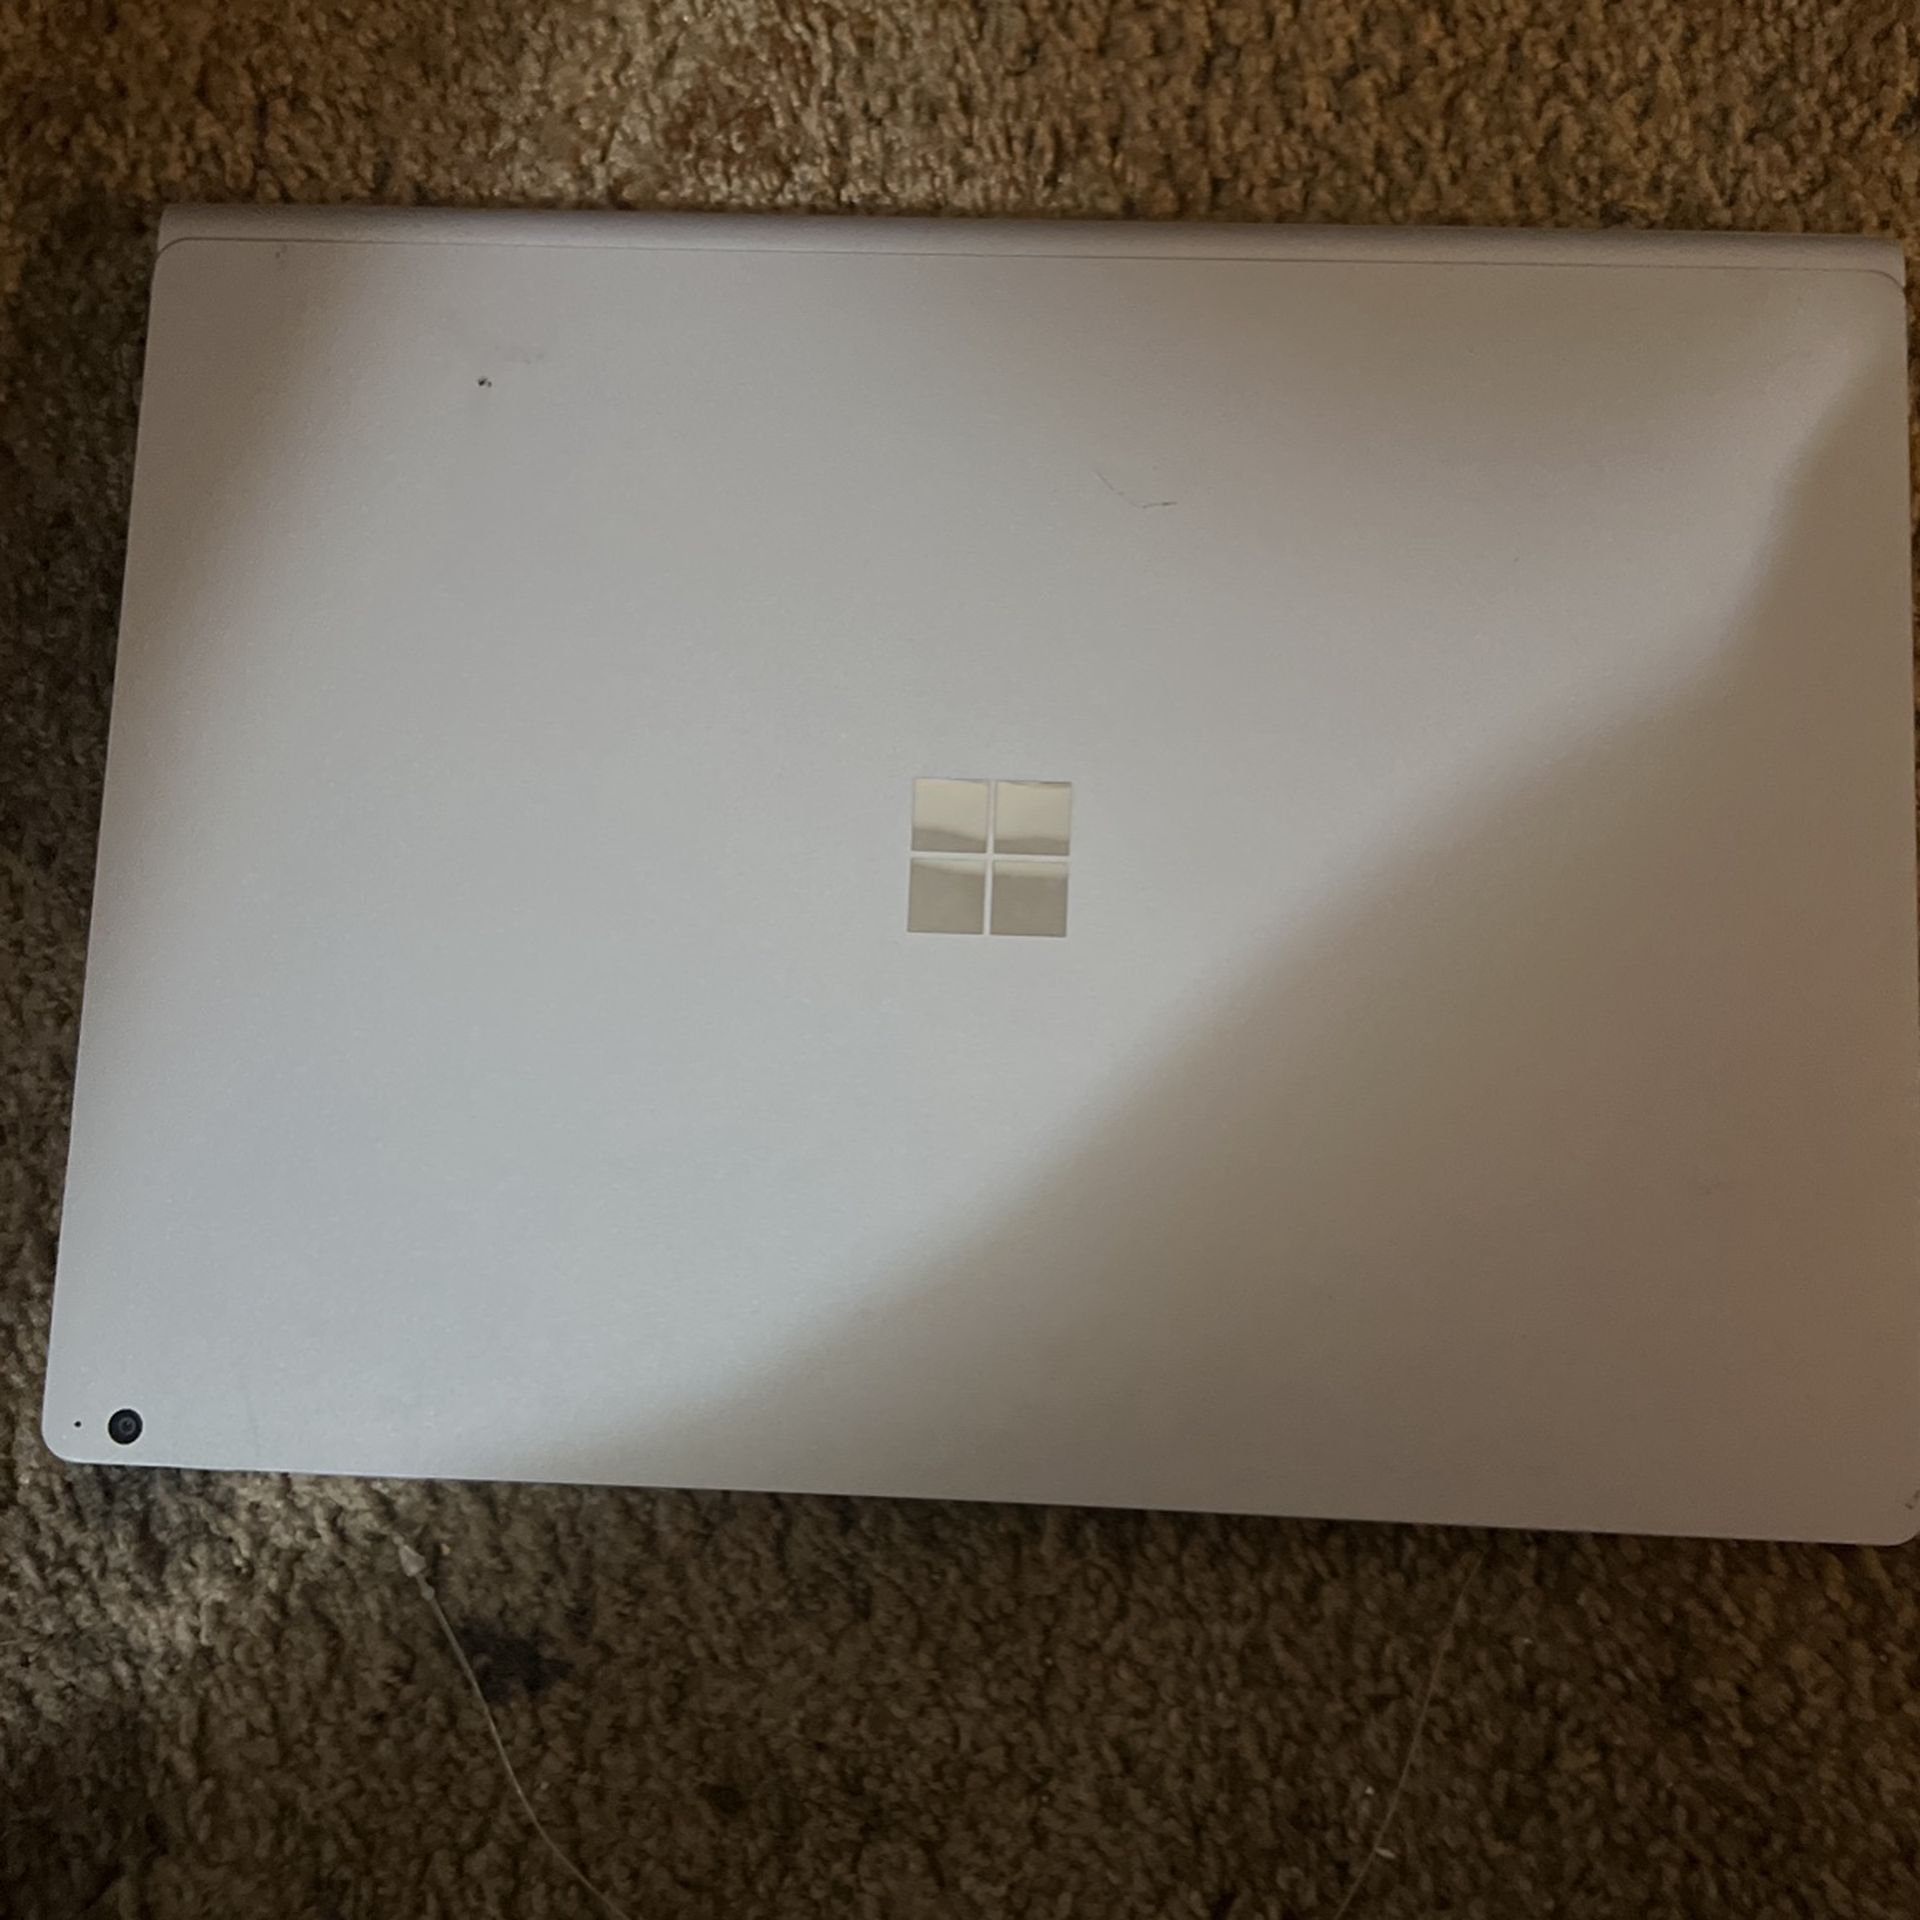 Surface book 